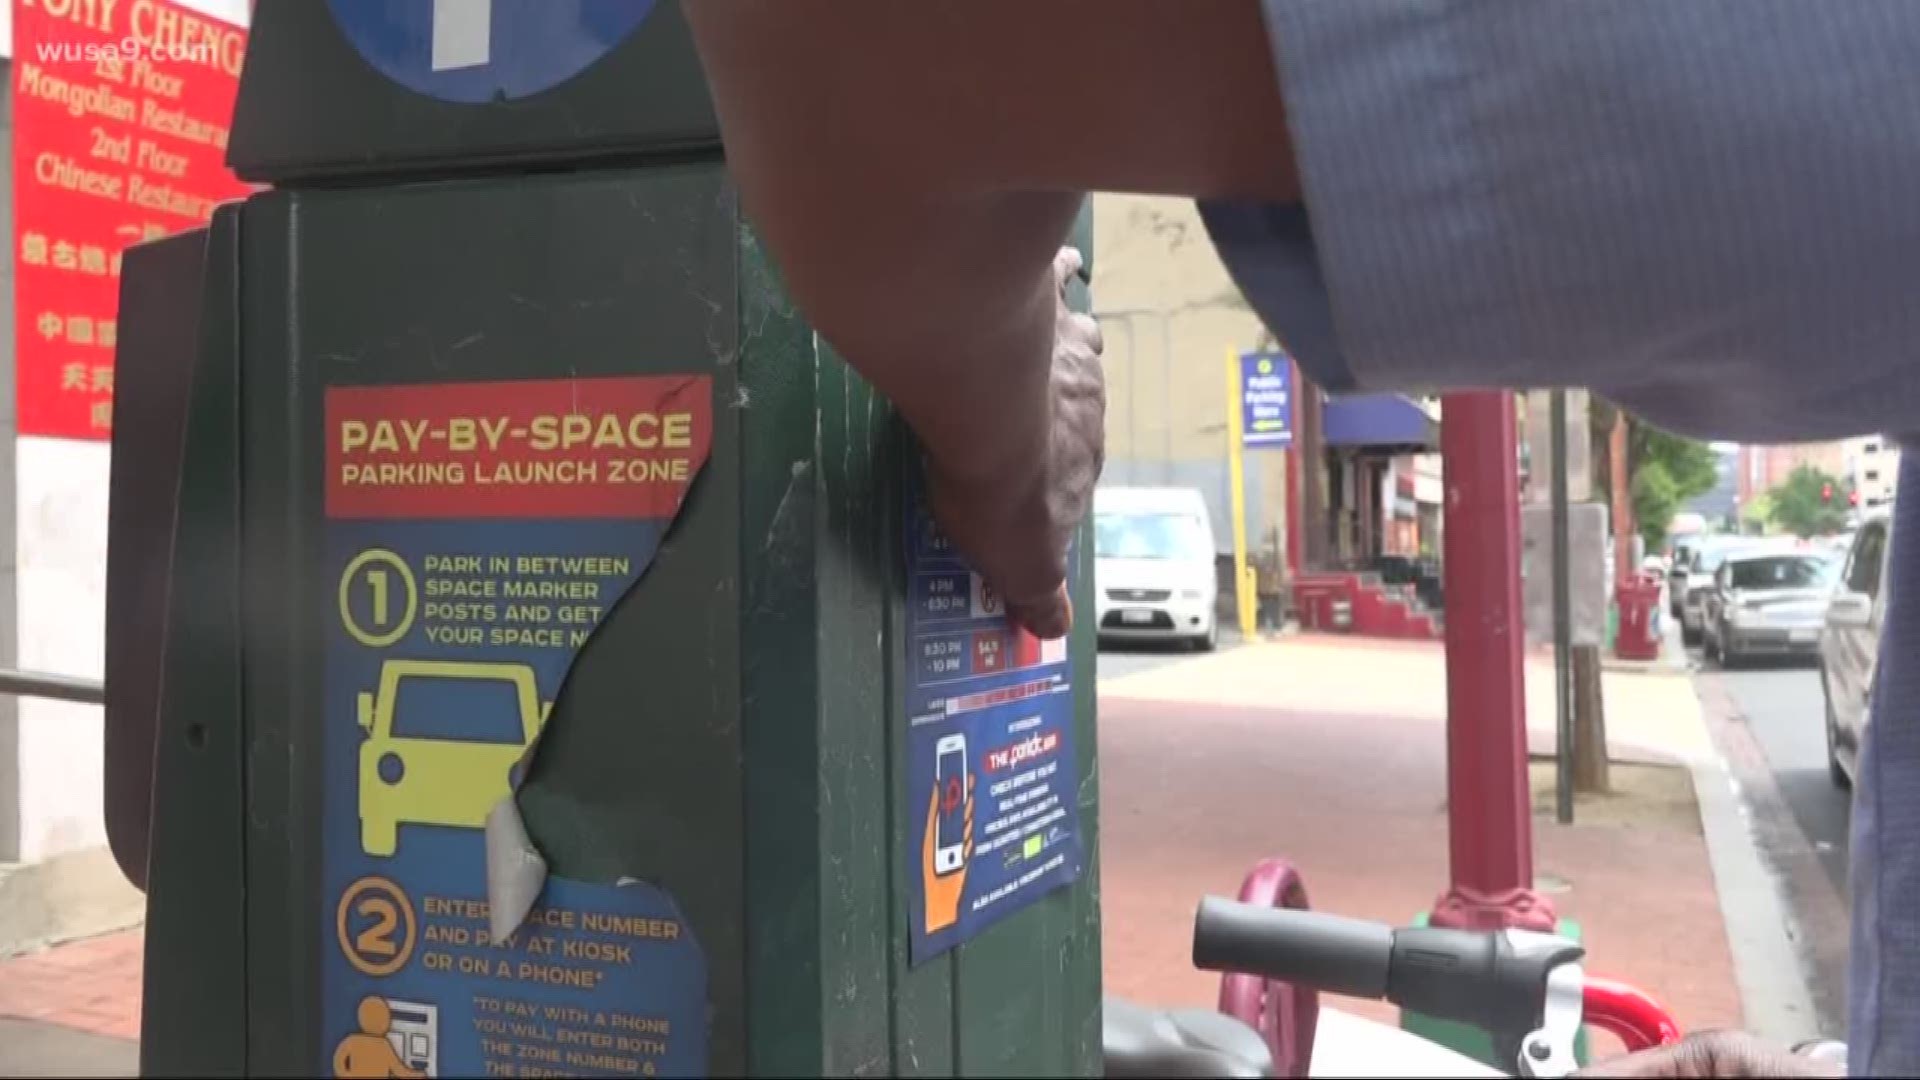 The city began its 'demand based' parking system Monday where in some places metered parking has gone up to $7 an hour. The city hopes raising prices will lead to more spots freeing up.